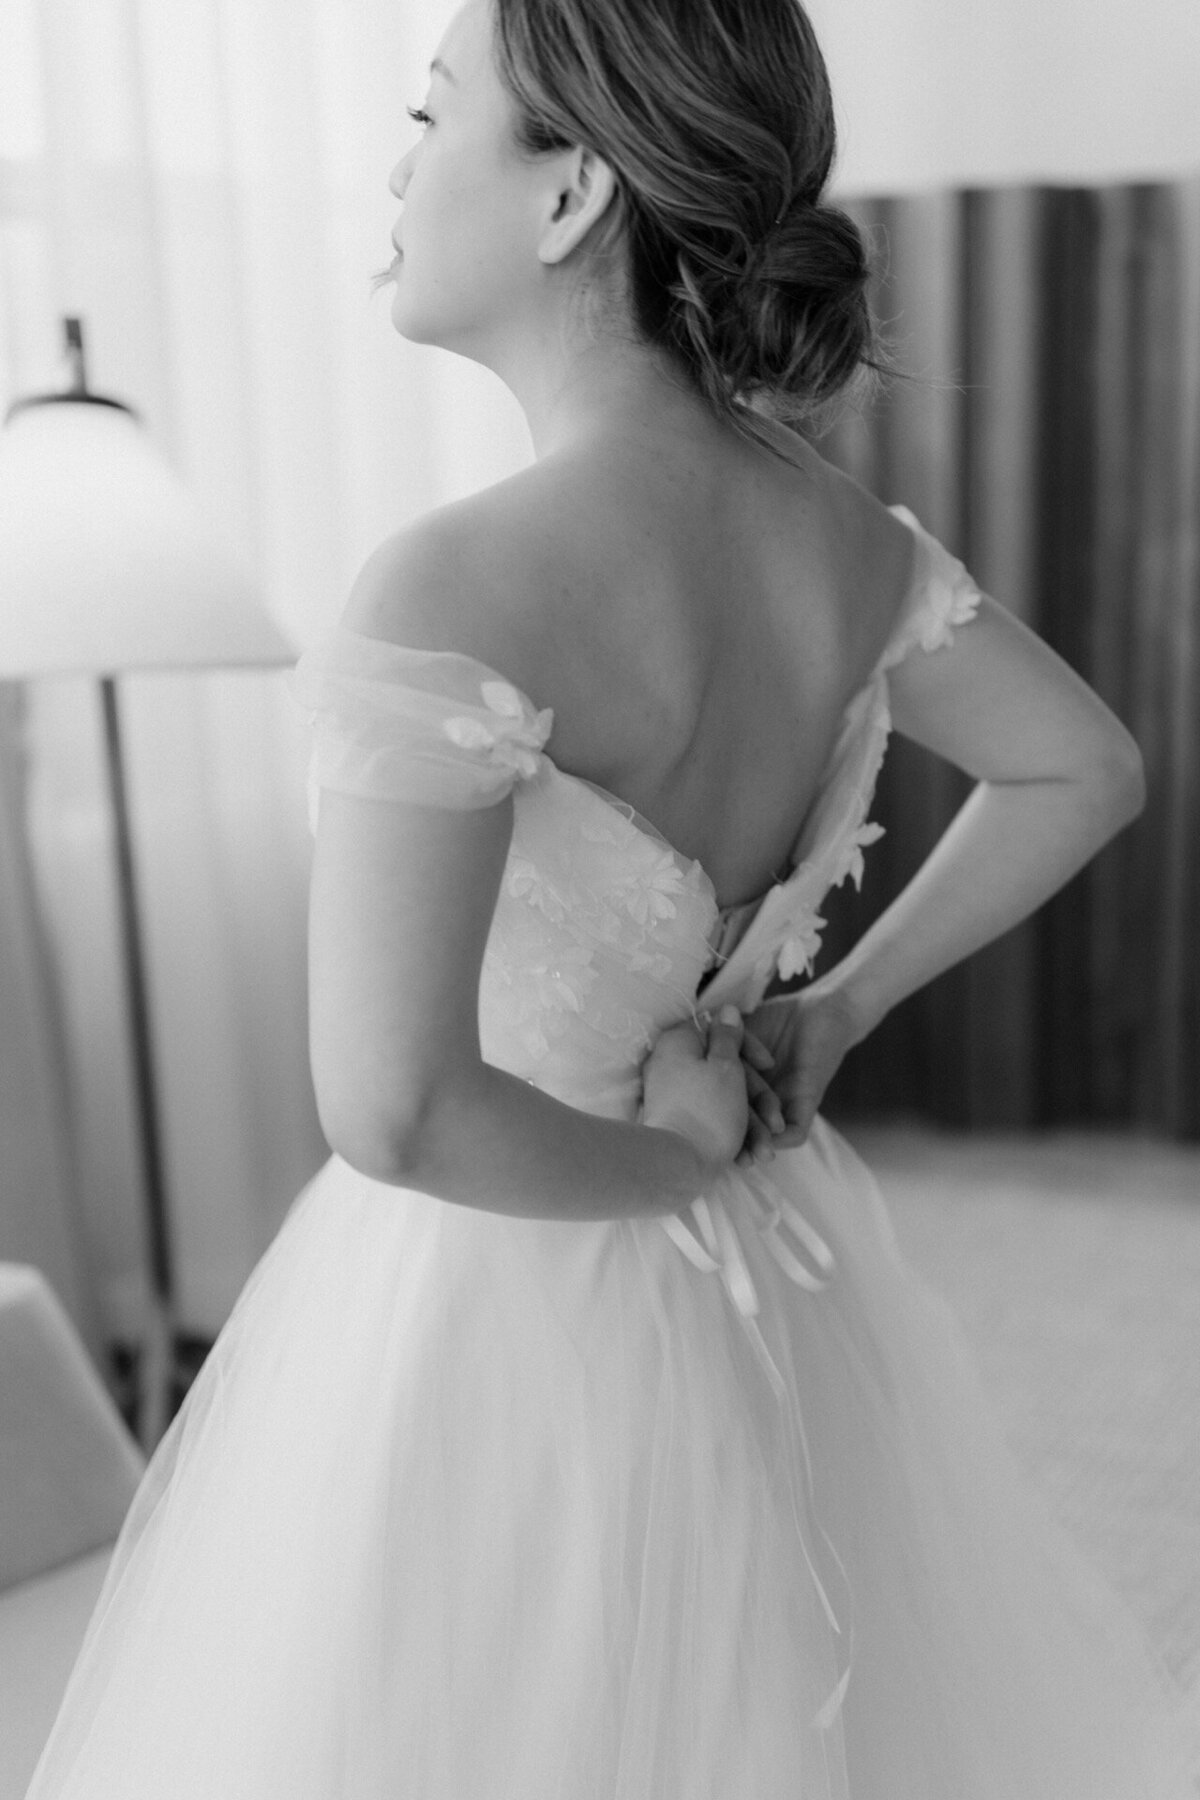 Bride trying to fix her dress while getting ready in a hotel.